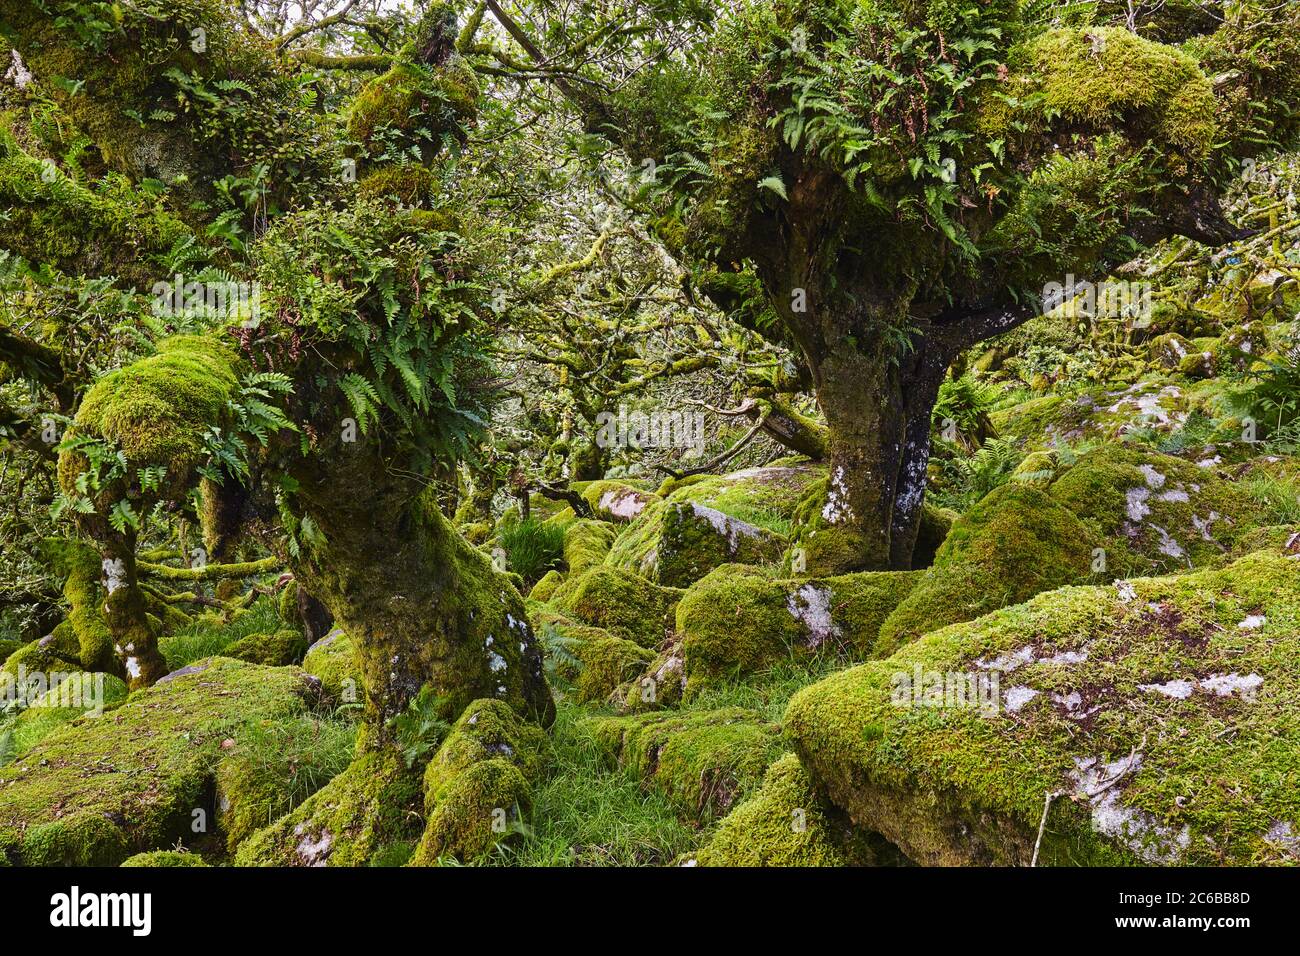 Ancient gnarled and stunted oak trees growing among moss-covered boulders in Wistman's Wood, Dartmoor National Park, Devon, England, United Kingdom, E Stock Photo